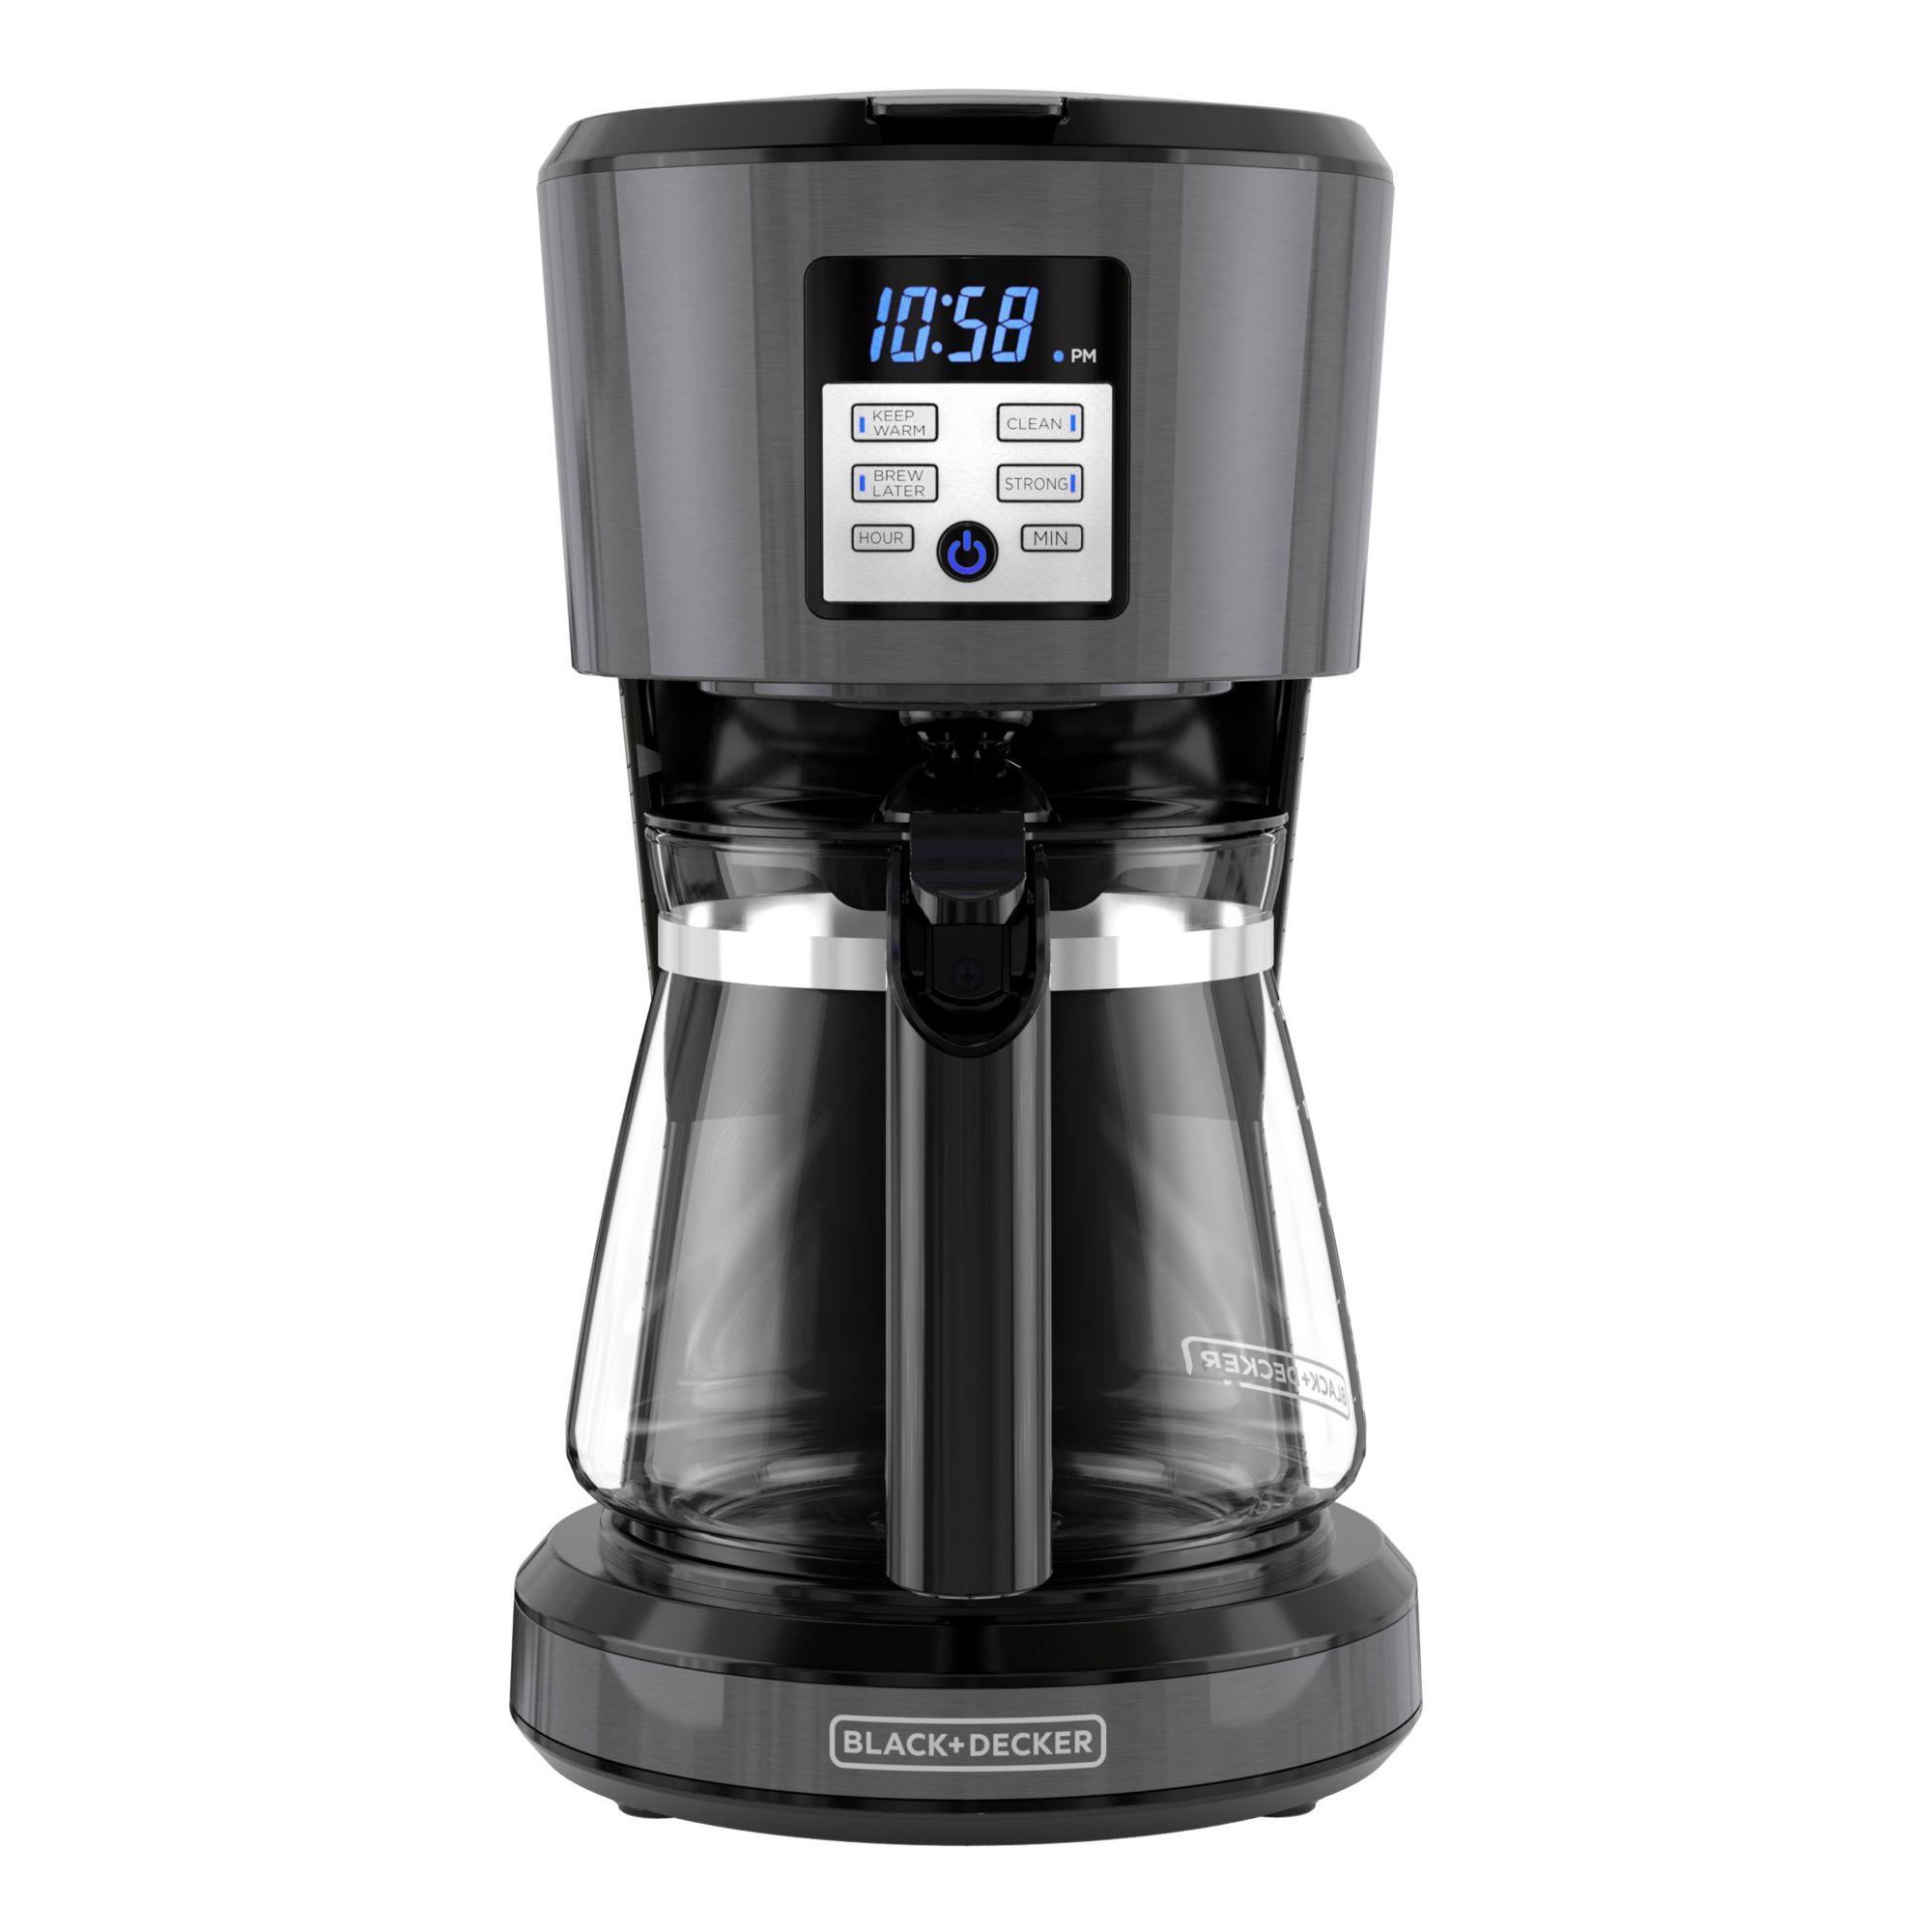 Black and Decker 12-Cup Programmable Coffee Maker - Black